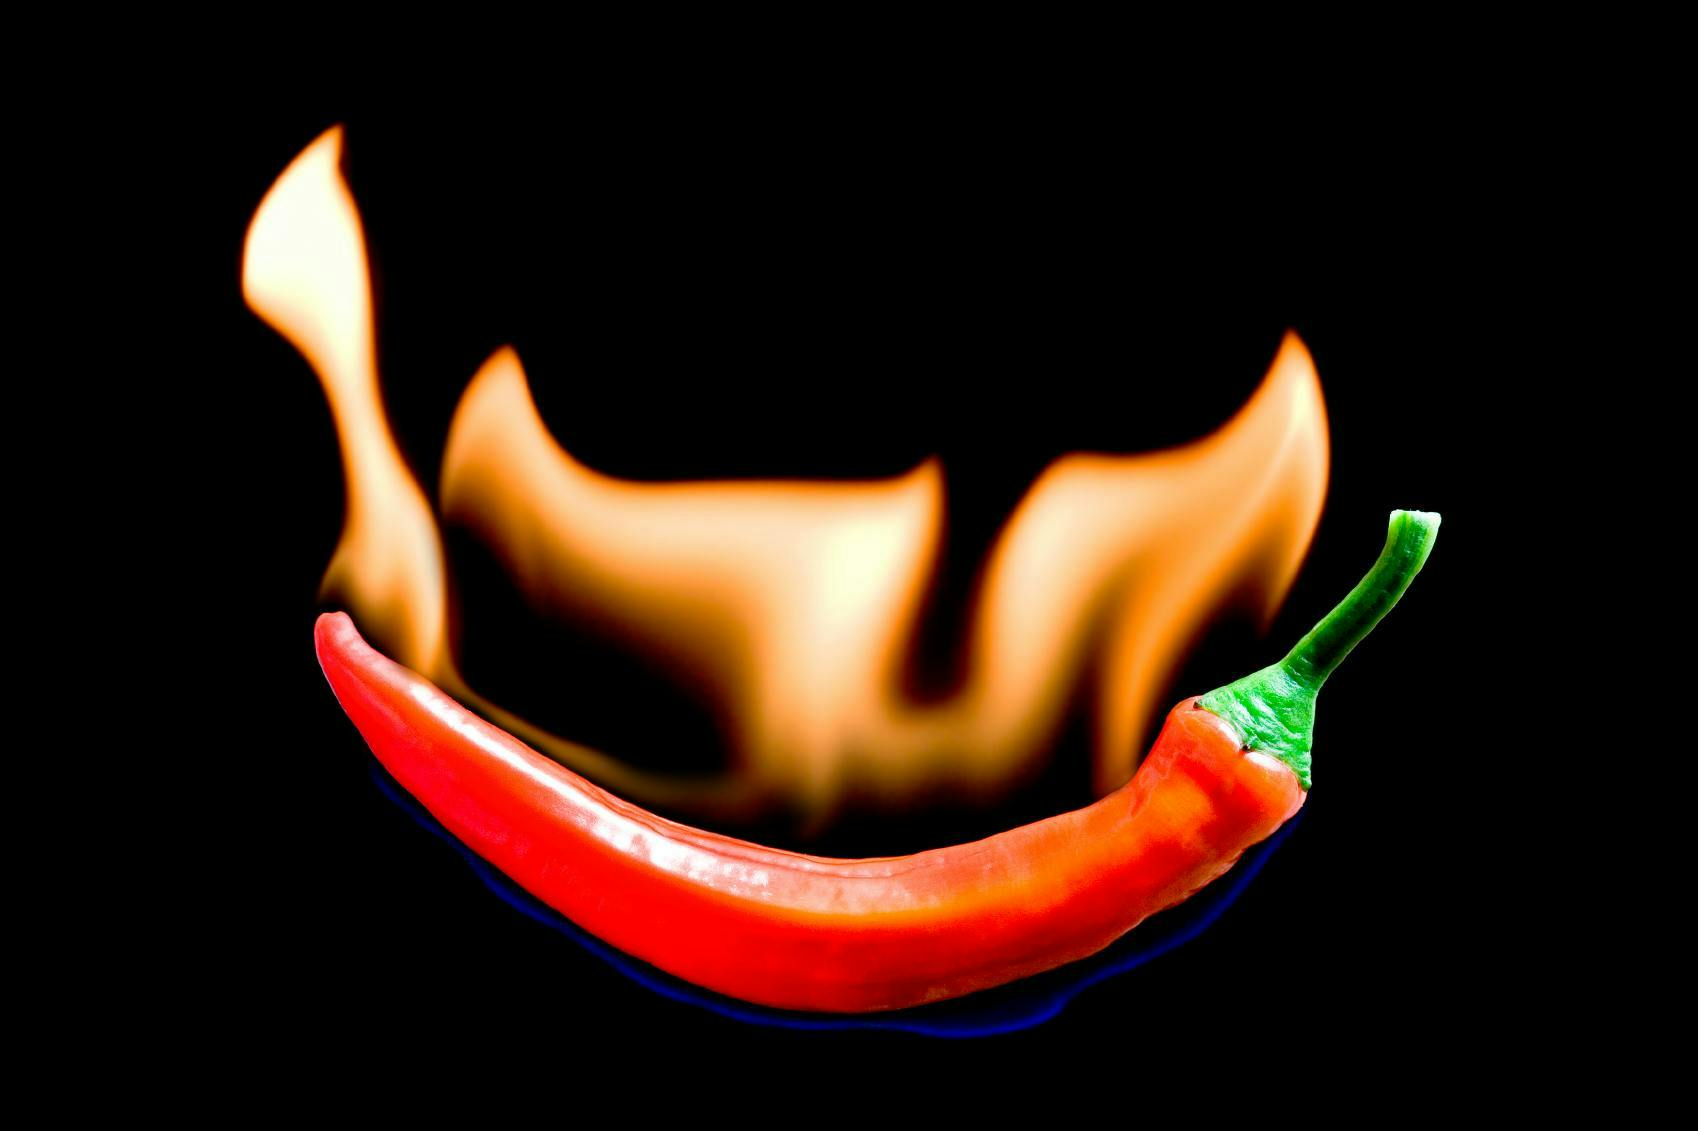 fiery chili pepper hot food spice asian mexican on black red one close up ingredient eating spicy fire frying